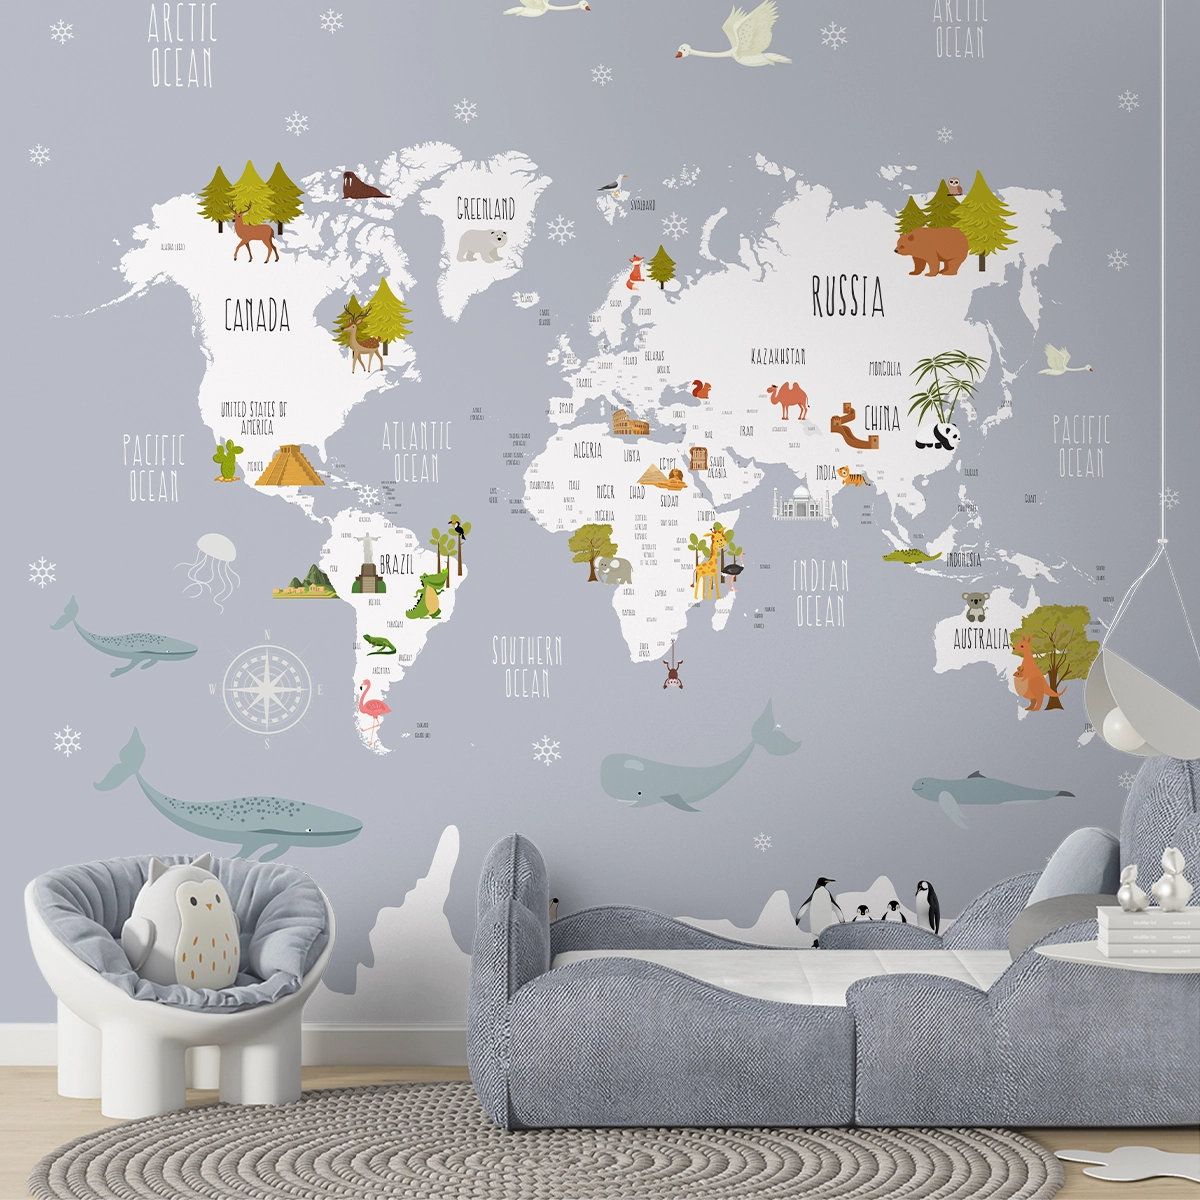 Large World Map Wallpaper with Cute Animals for Walls, Grey